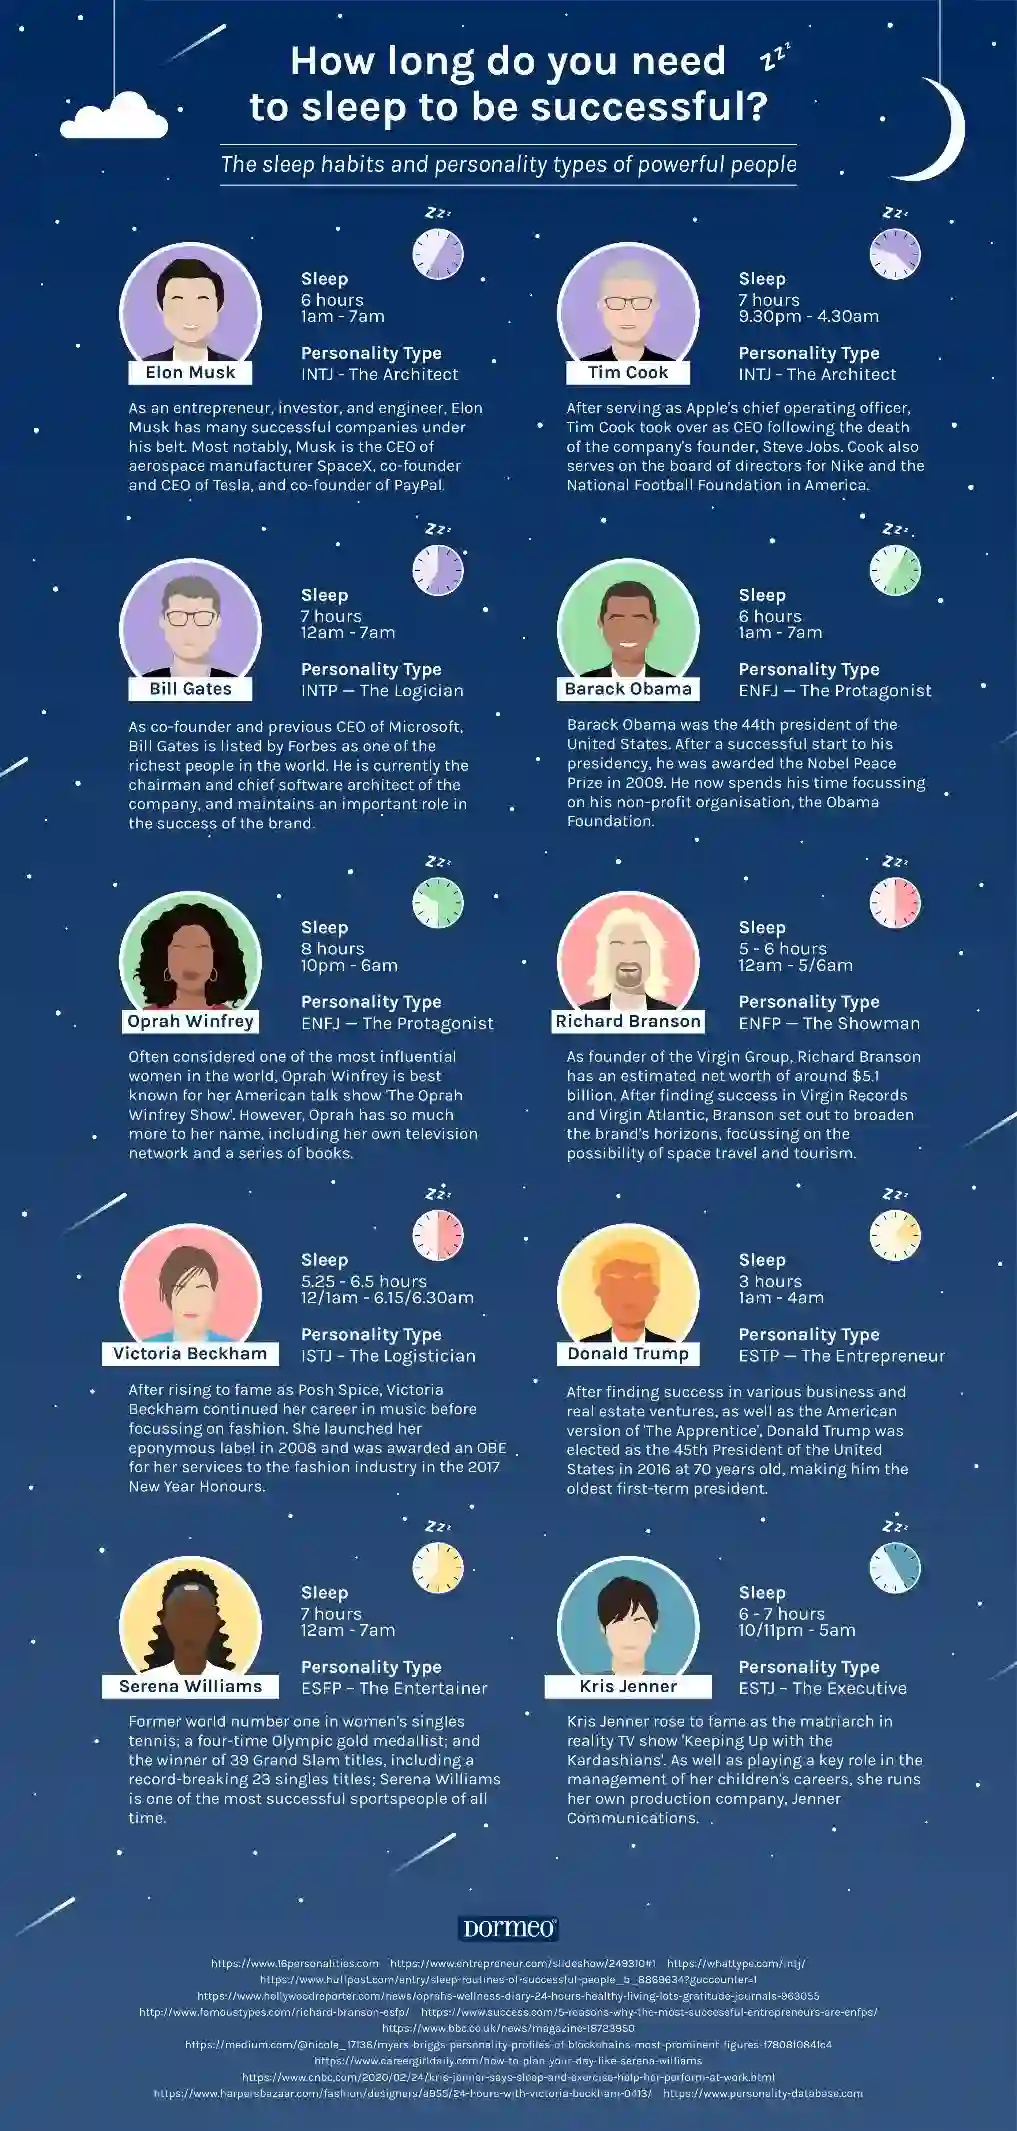 infographic on the sleep habits of 10 world leaders including Donald Trump and Elon Musk